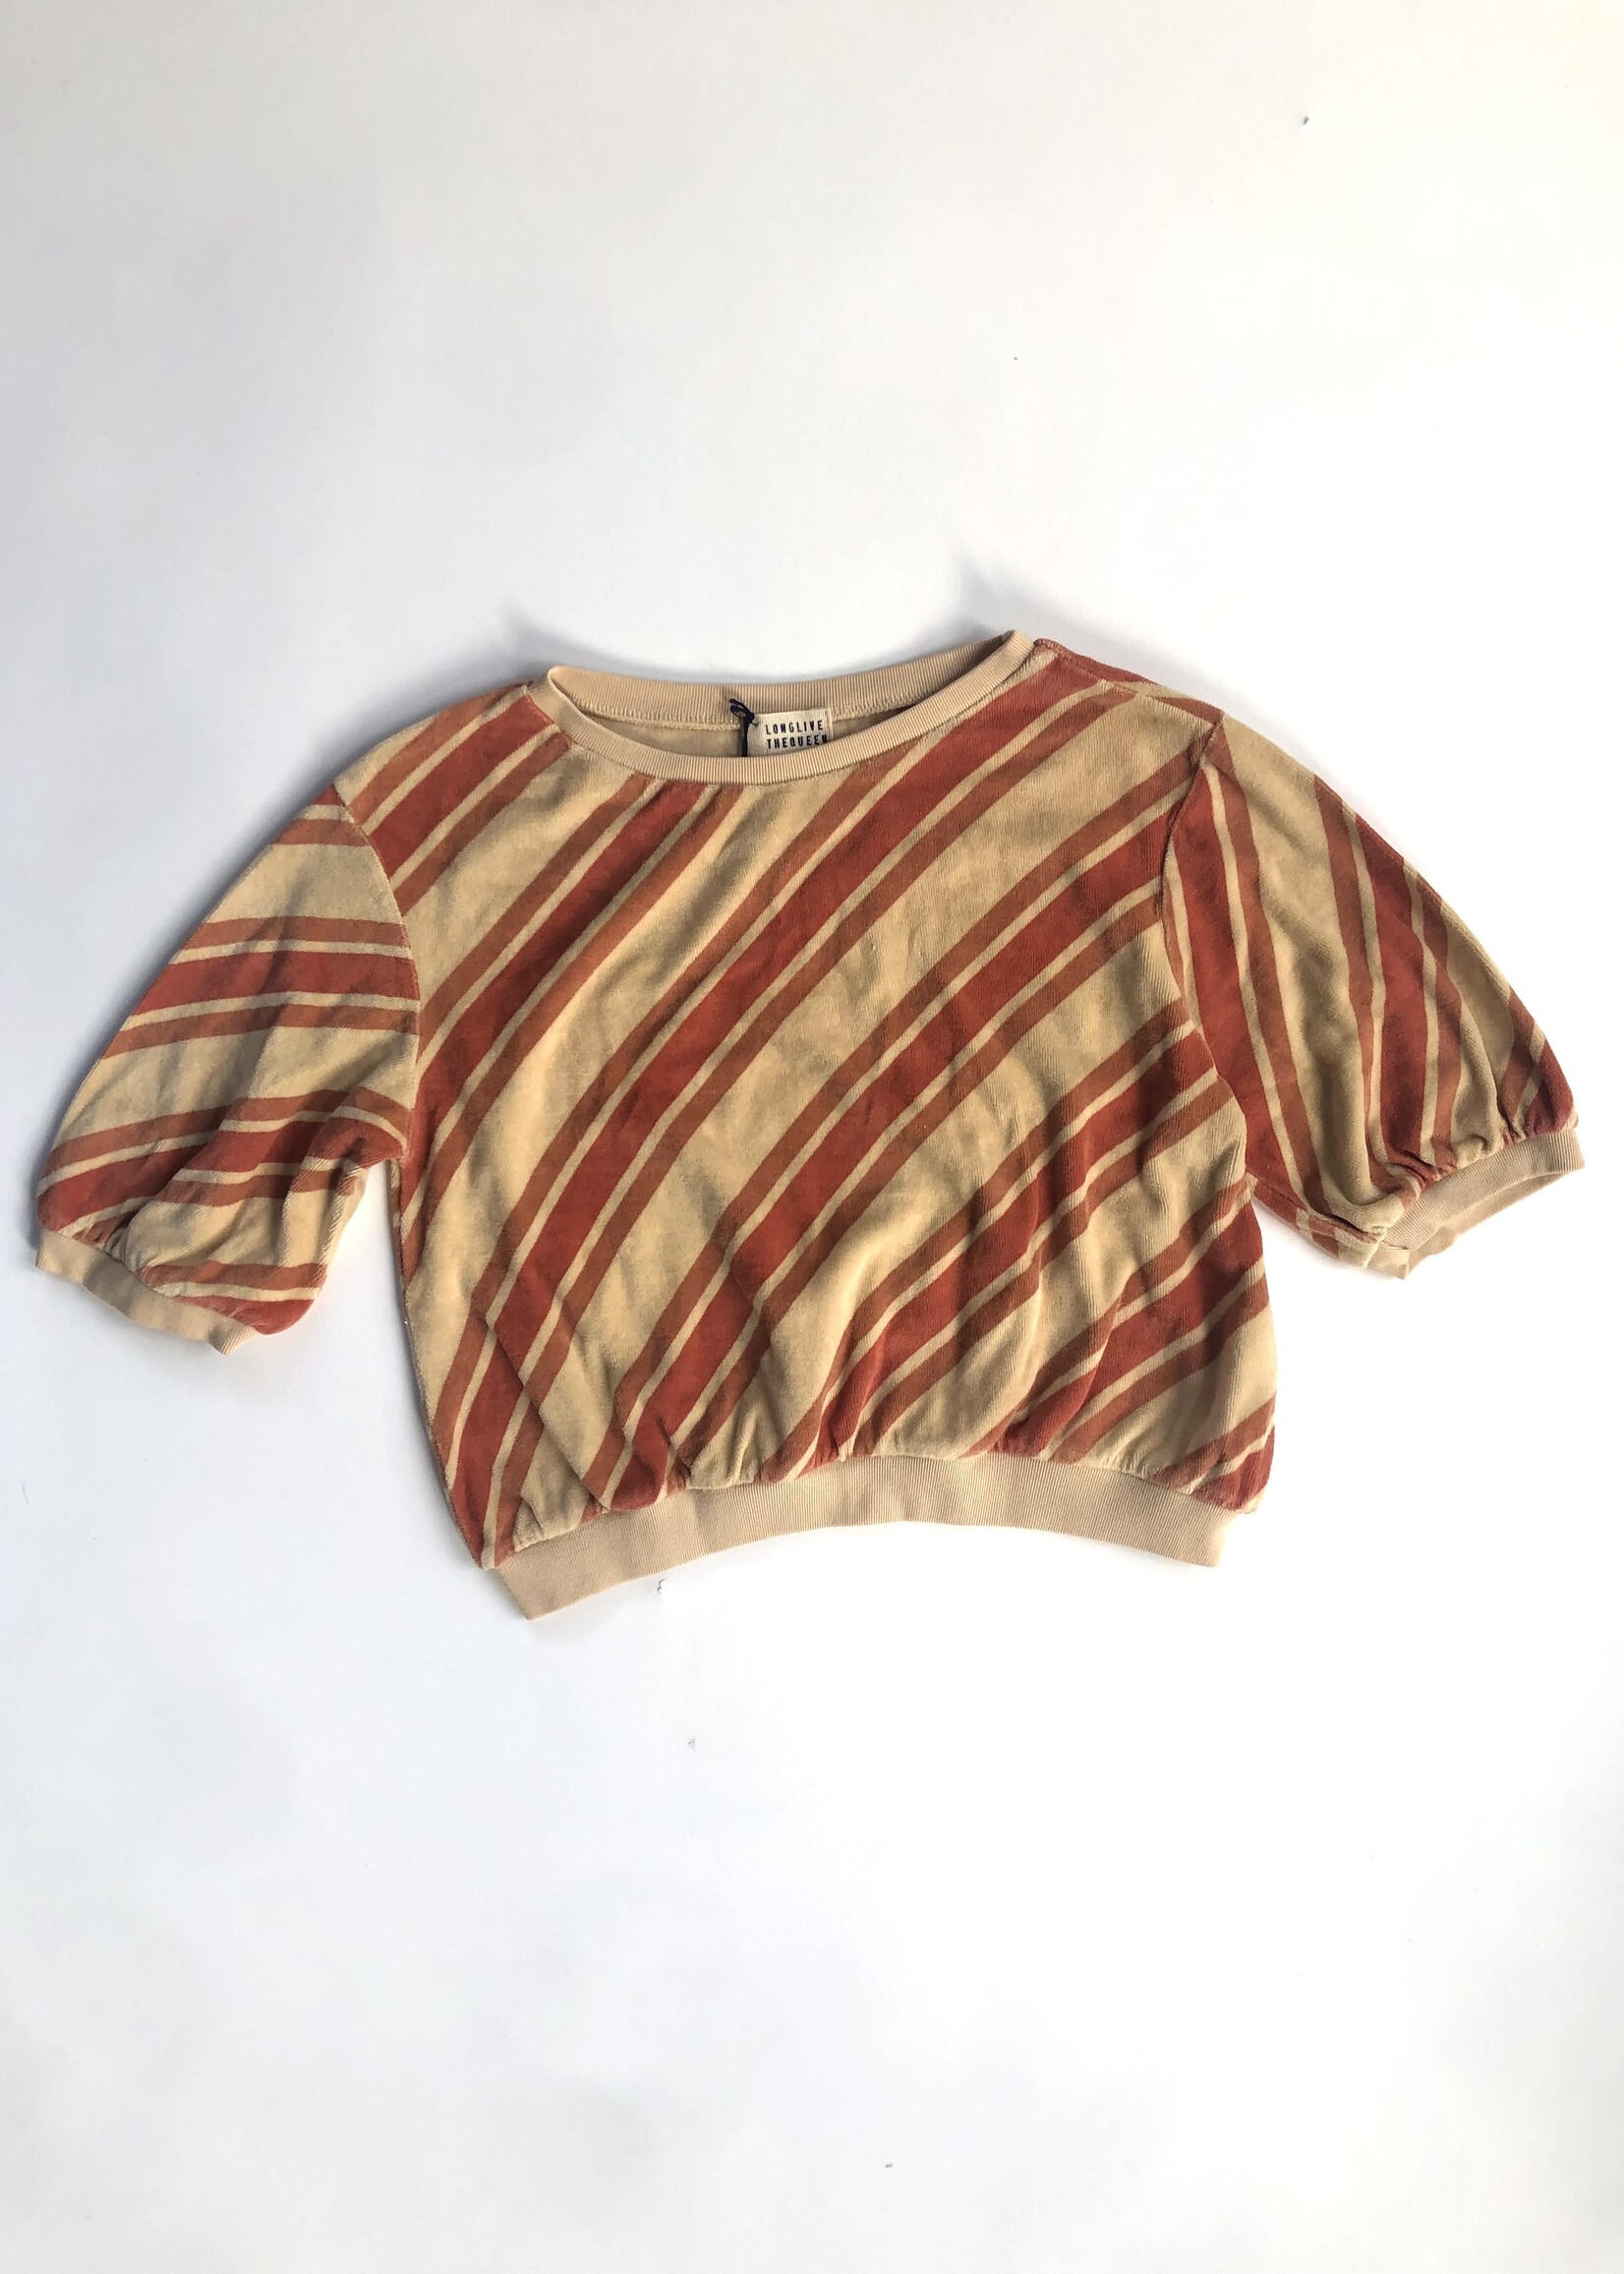 Long Live The Queen Burned orange striped sweater shirt 6-8y